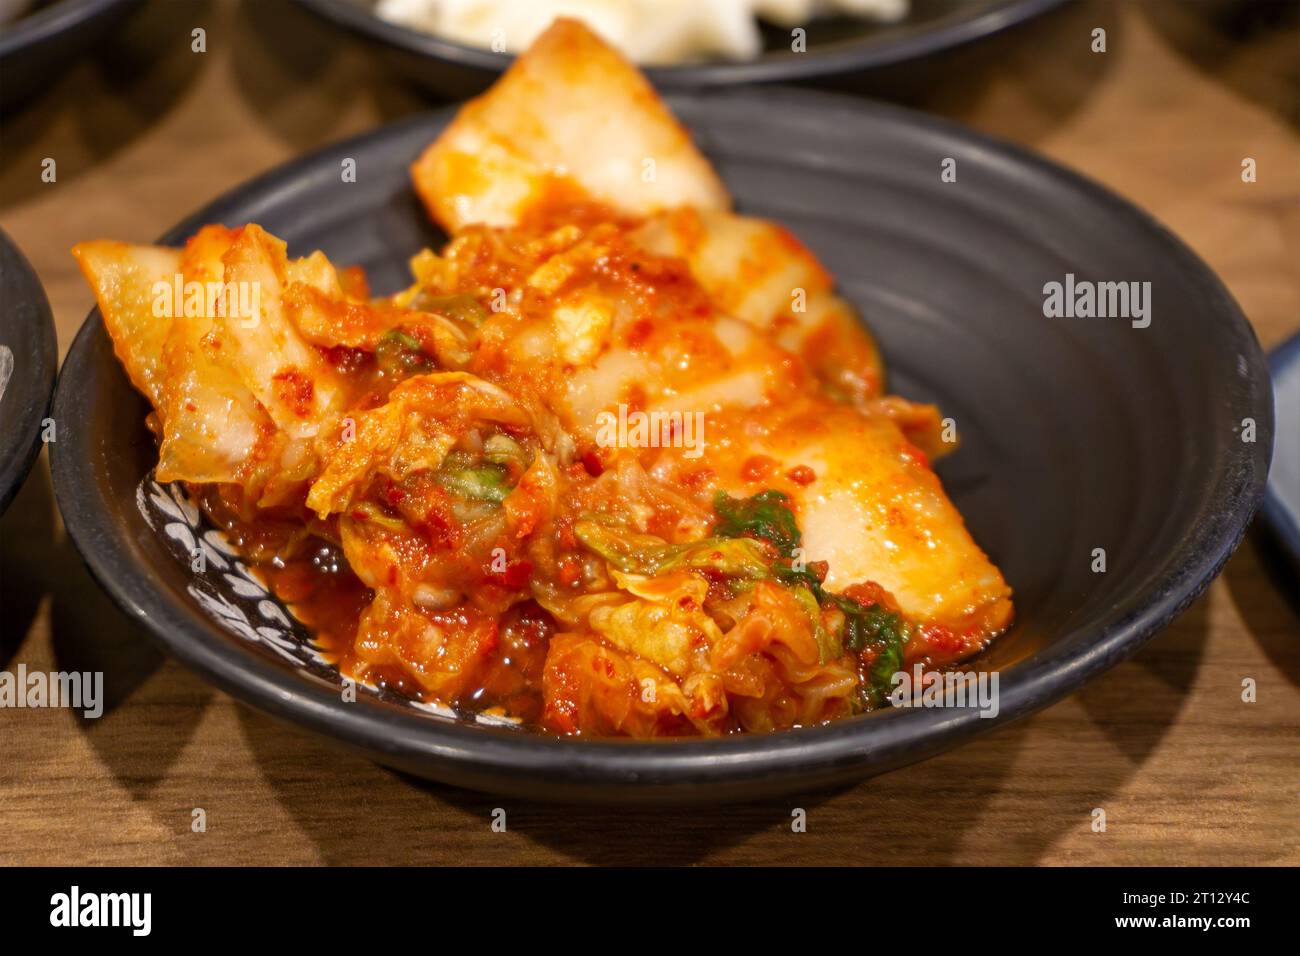 Spicy Korean fermented or aged cabbage known as Kimchi which is a traditional mainstay in Korean cuisine. Stock Photo